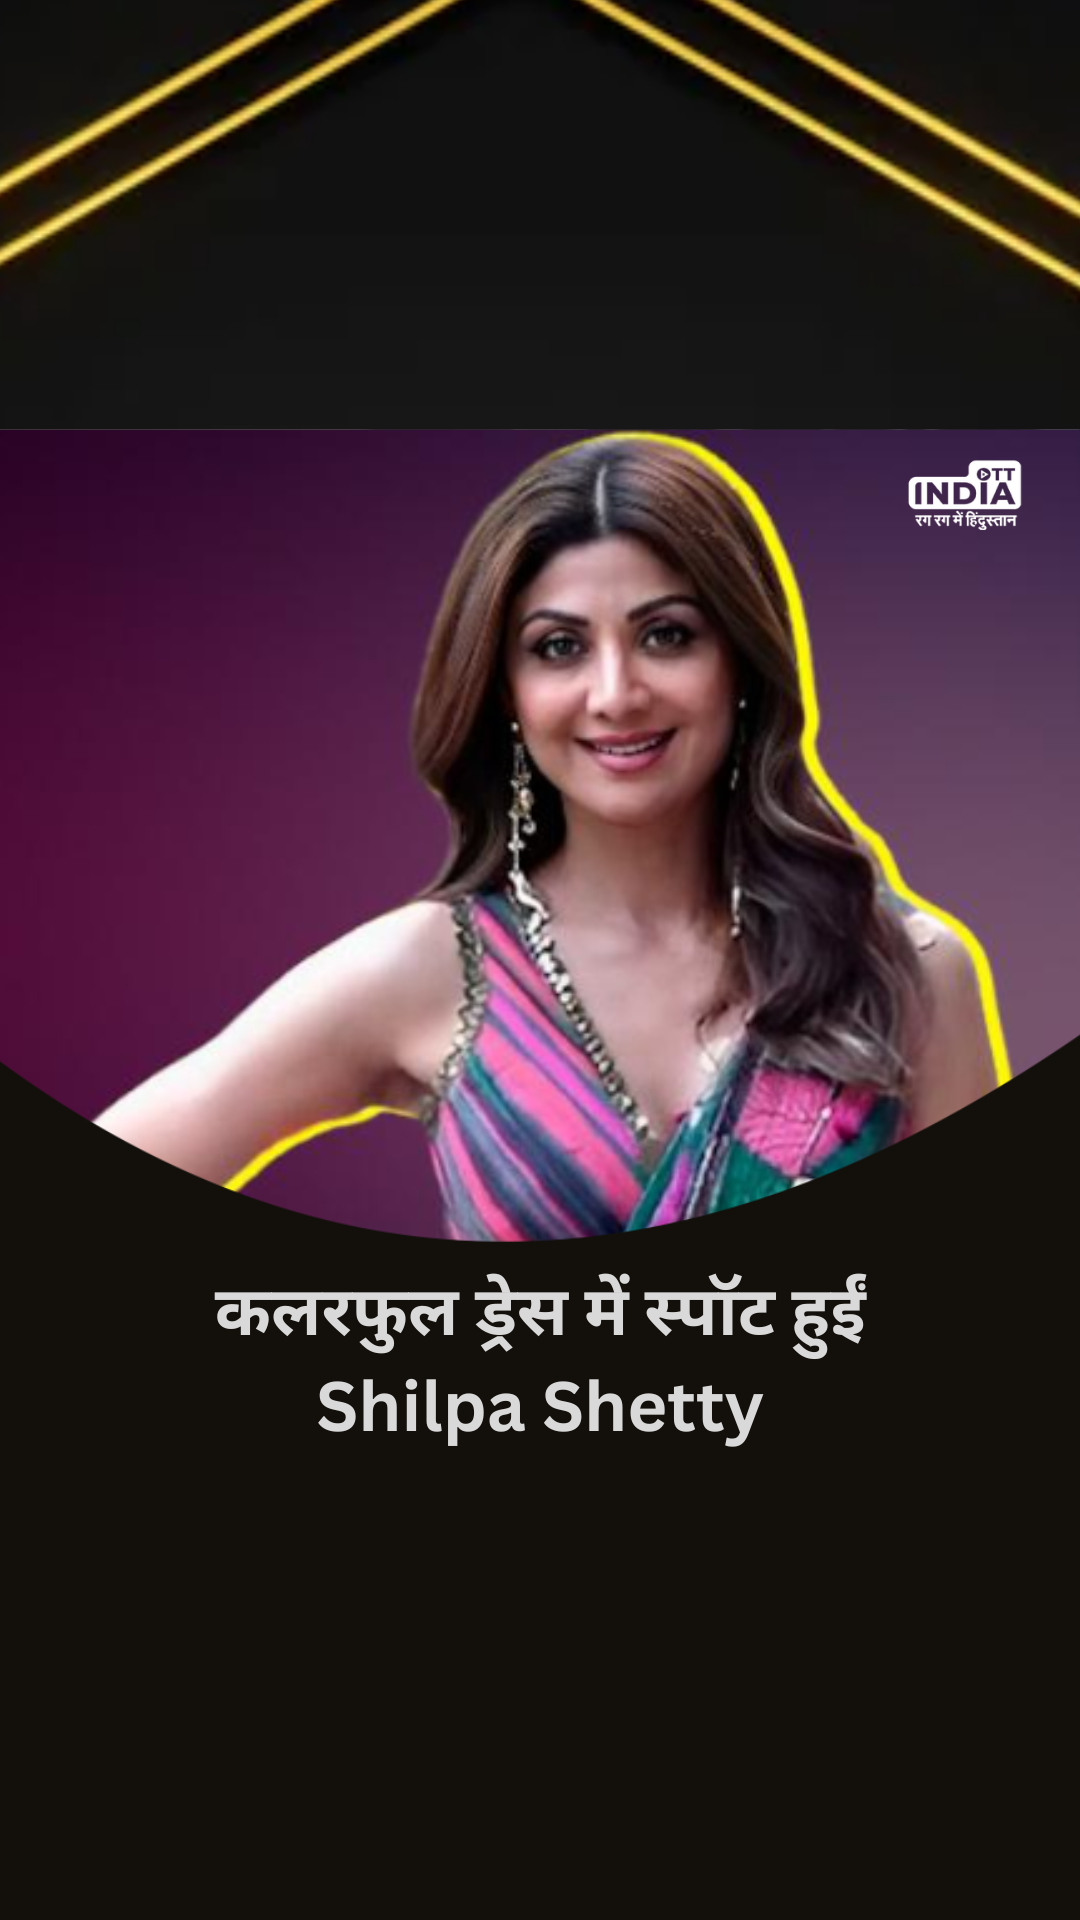 Bollywood actress Shilpa Shetty spotted in colorful dress